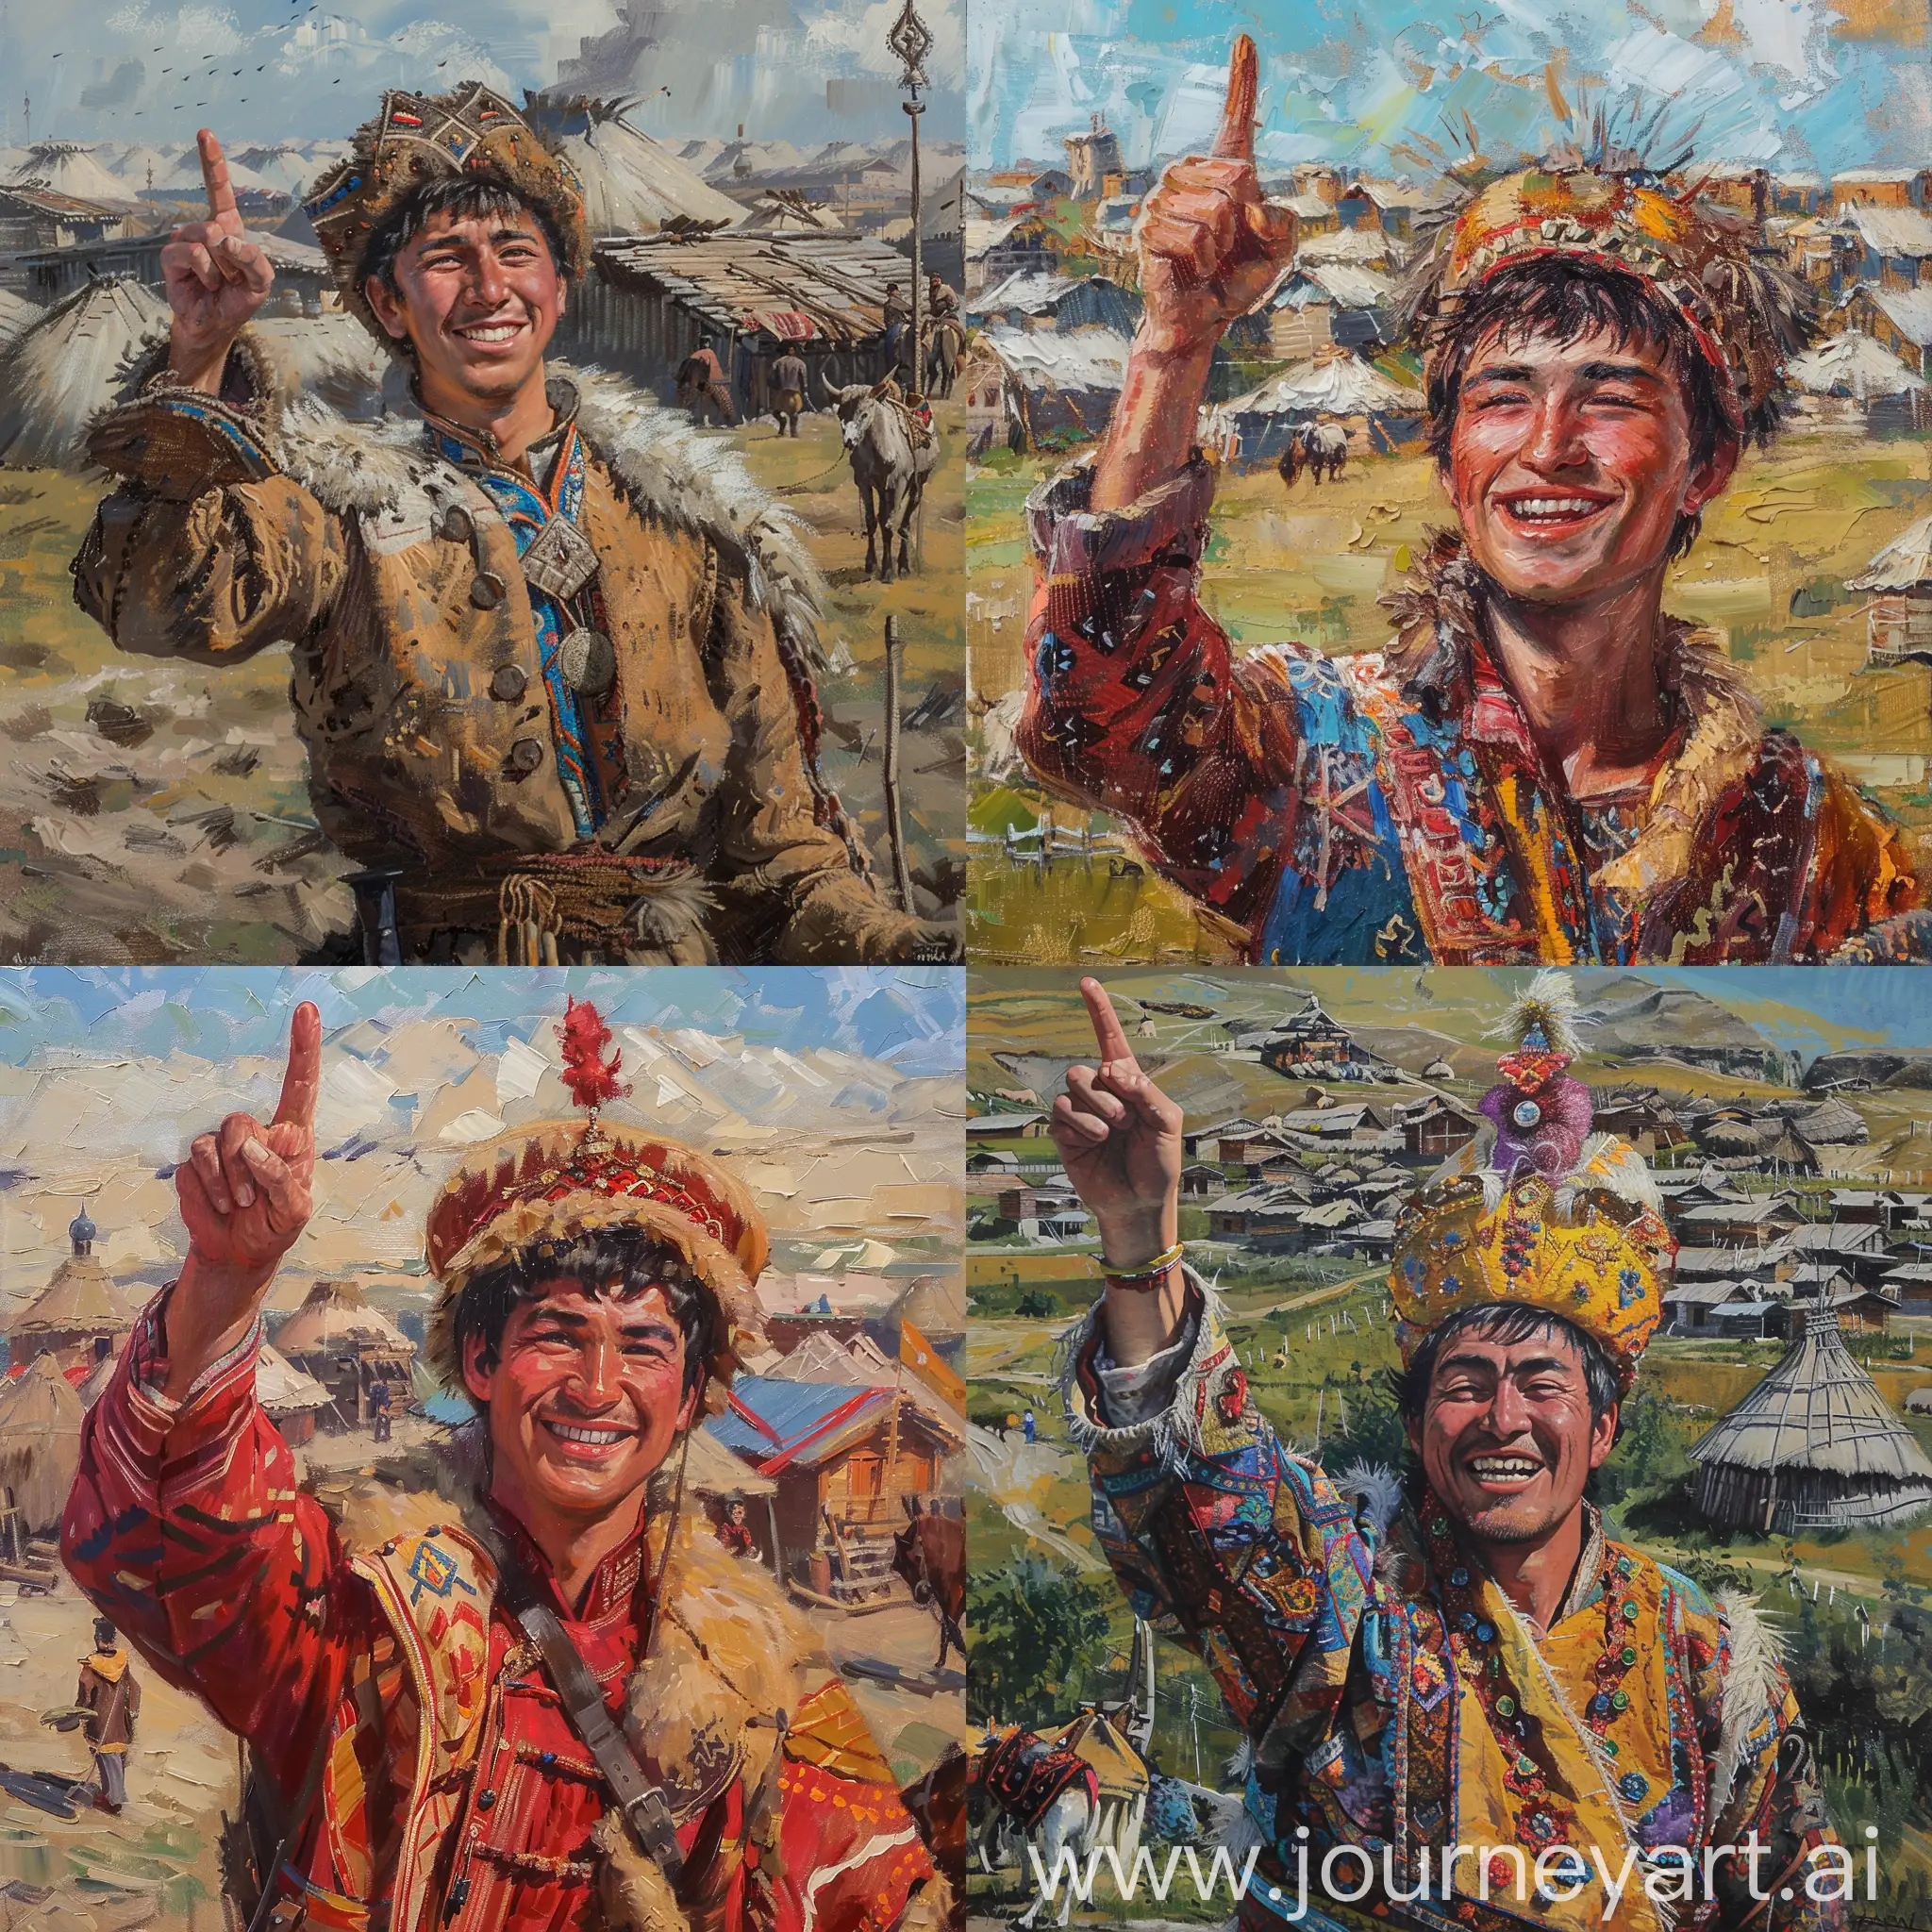 Kazakh nomads village in background and in the foreground is our young and handsome kazakh character, now in Kazakh costume something national, smiles and raises a finger upwards, oil paining, renaissance style
